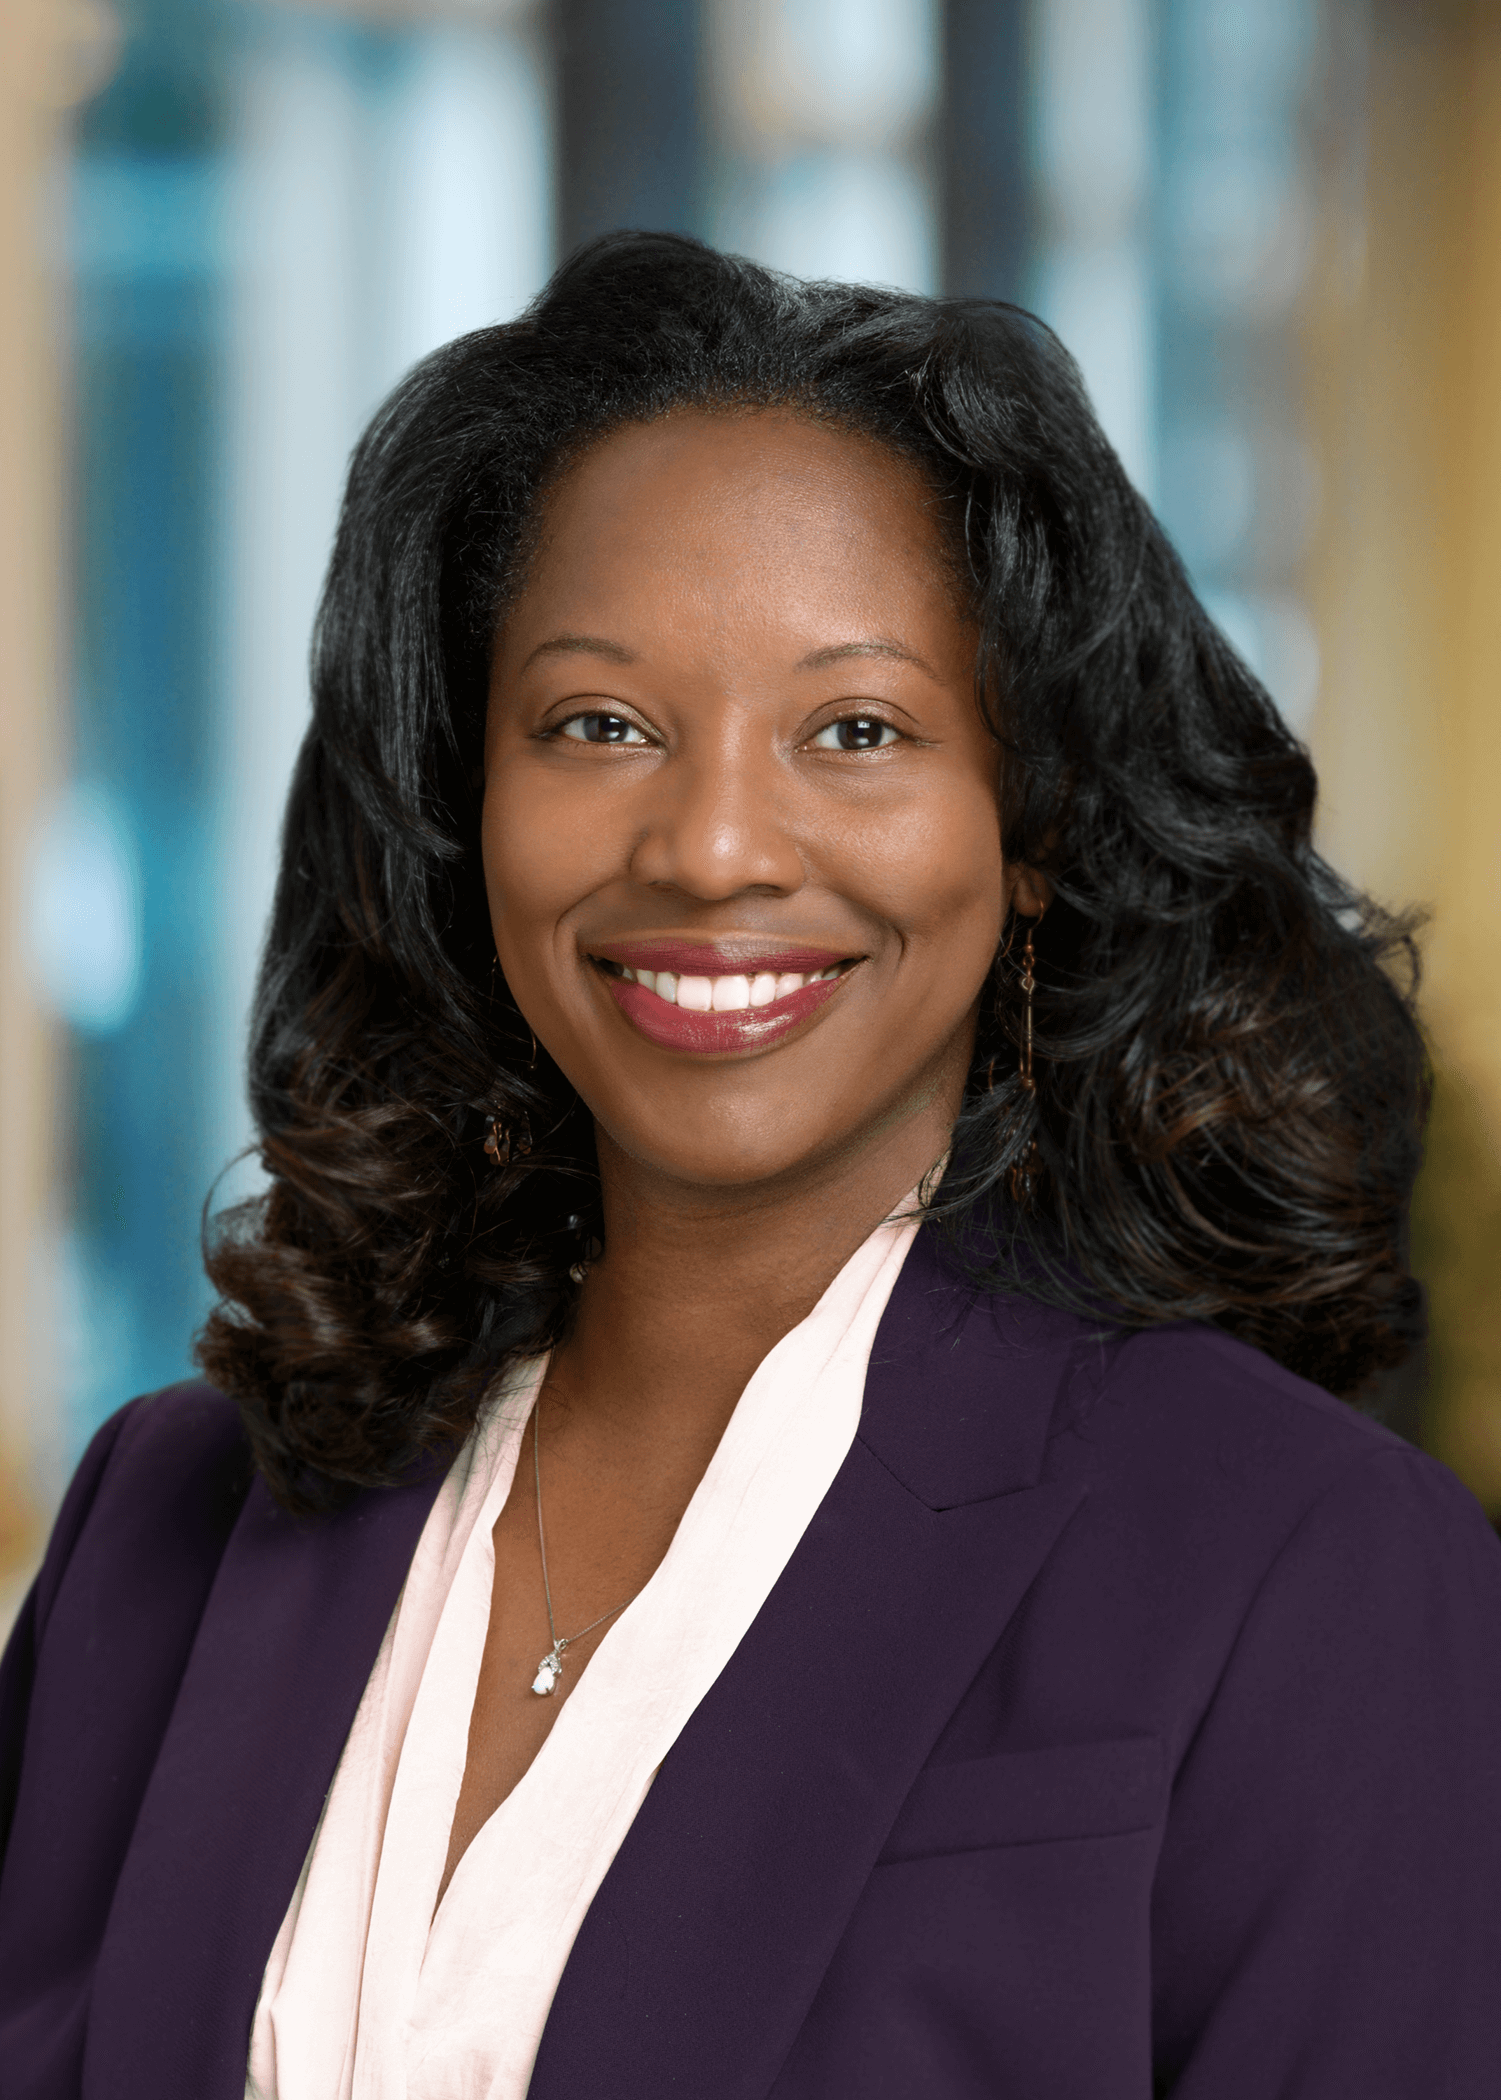 ACLS19 Climate Leader Q&A: Dr. Jalonne White-Newsome